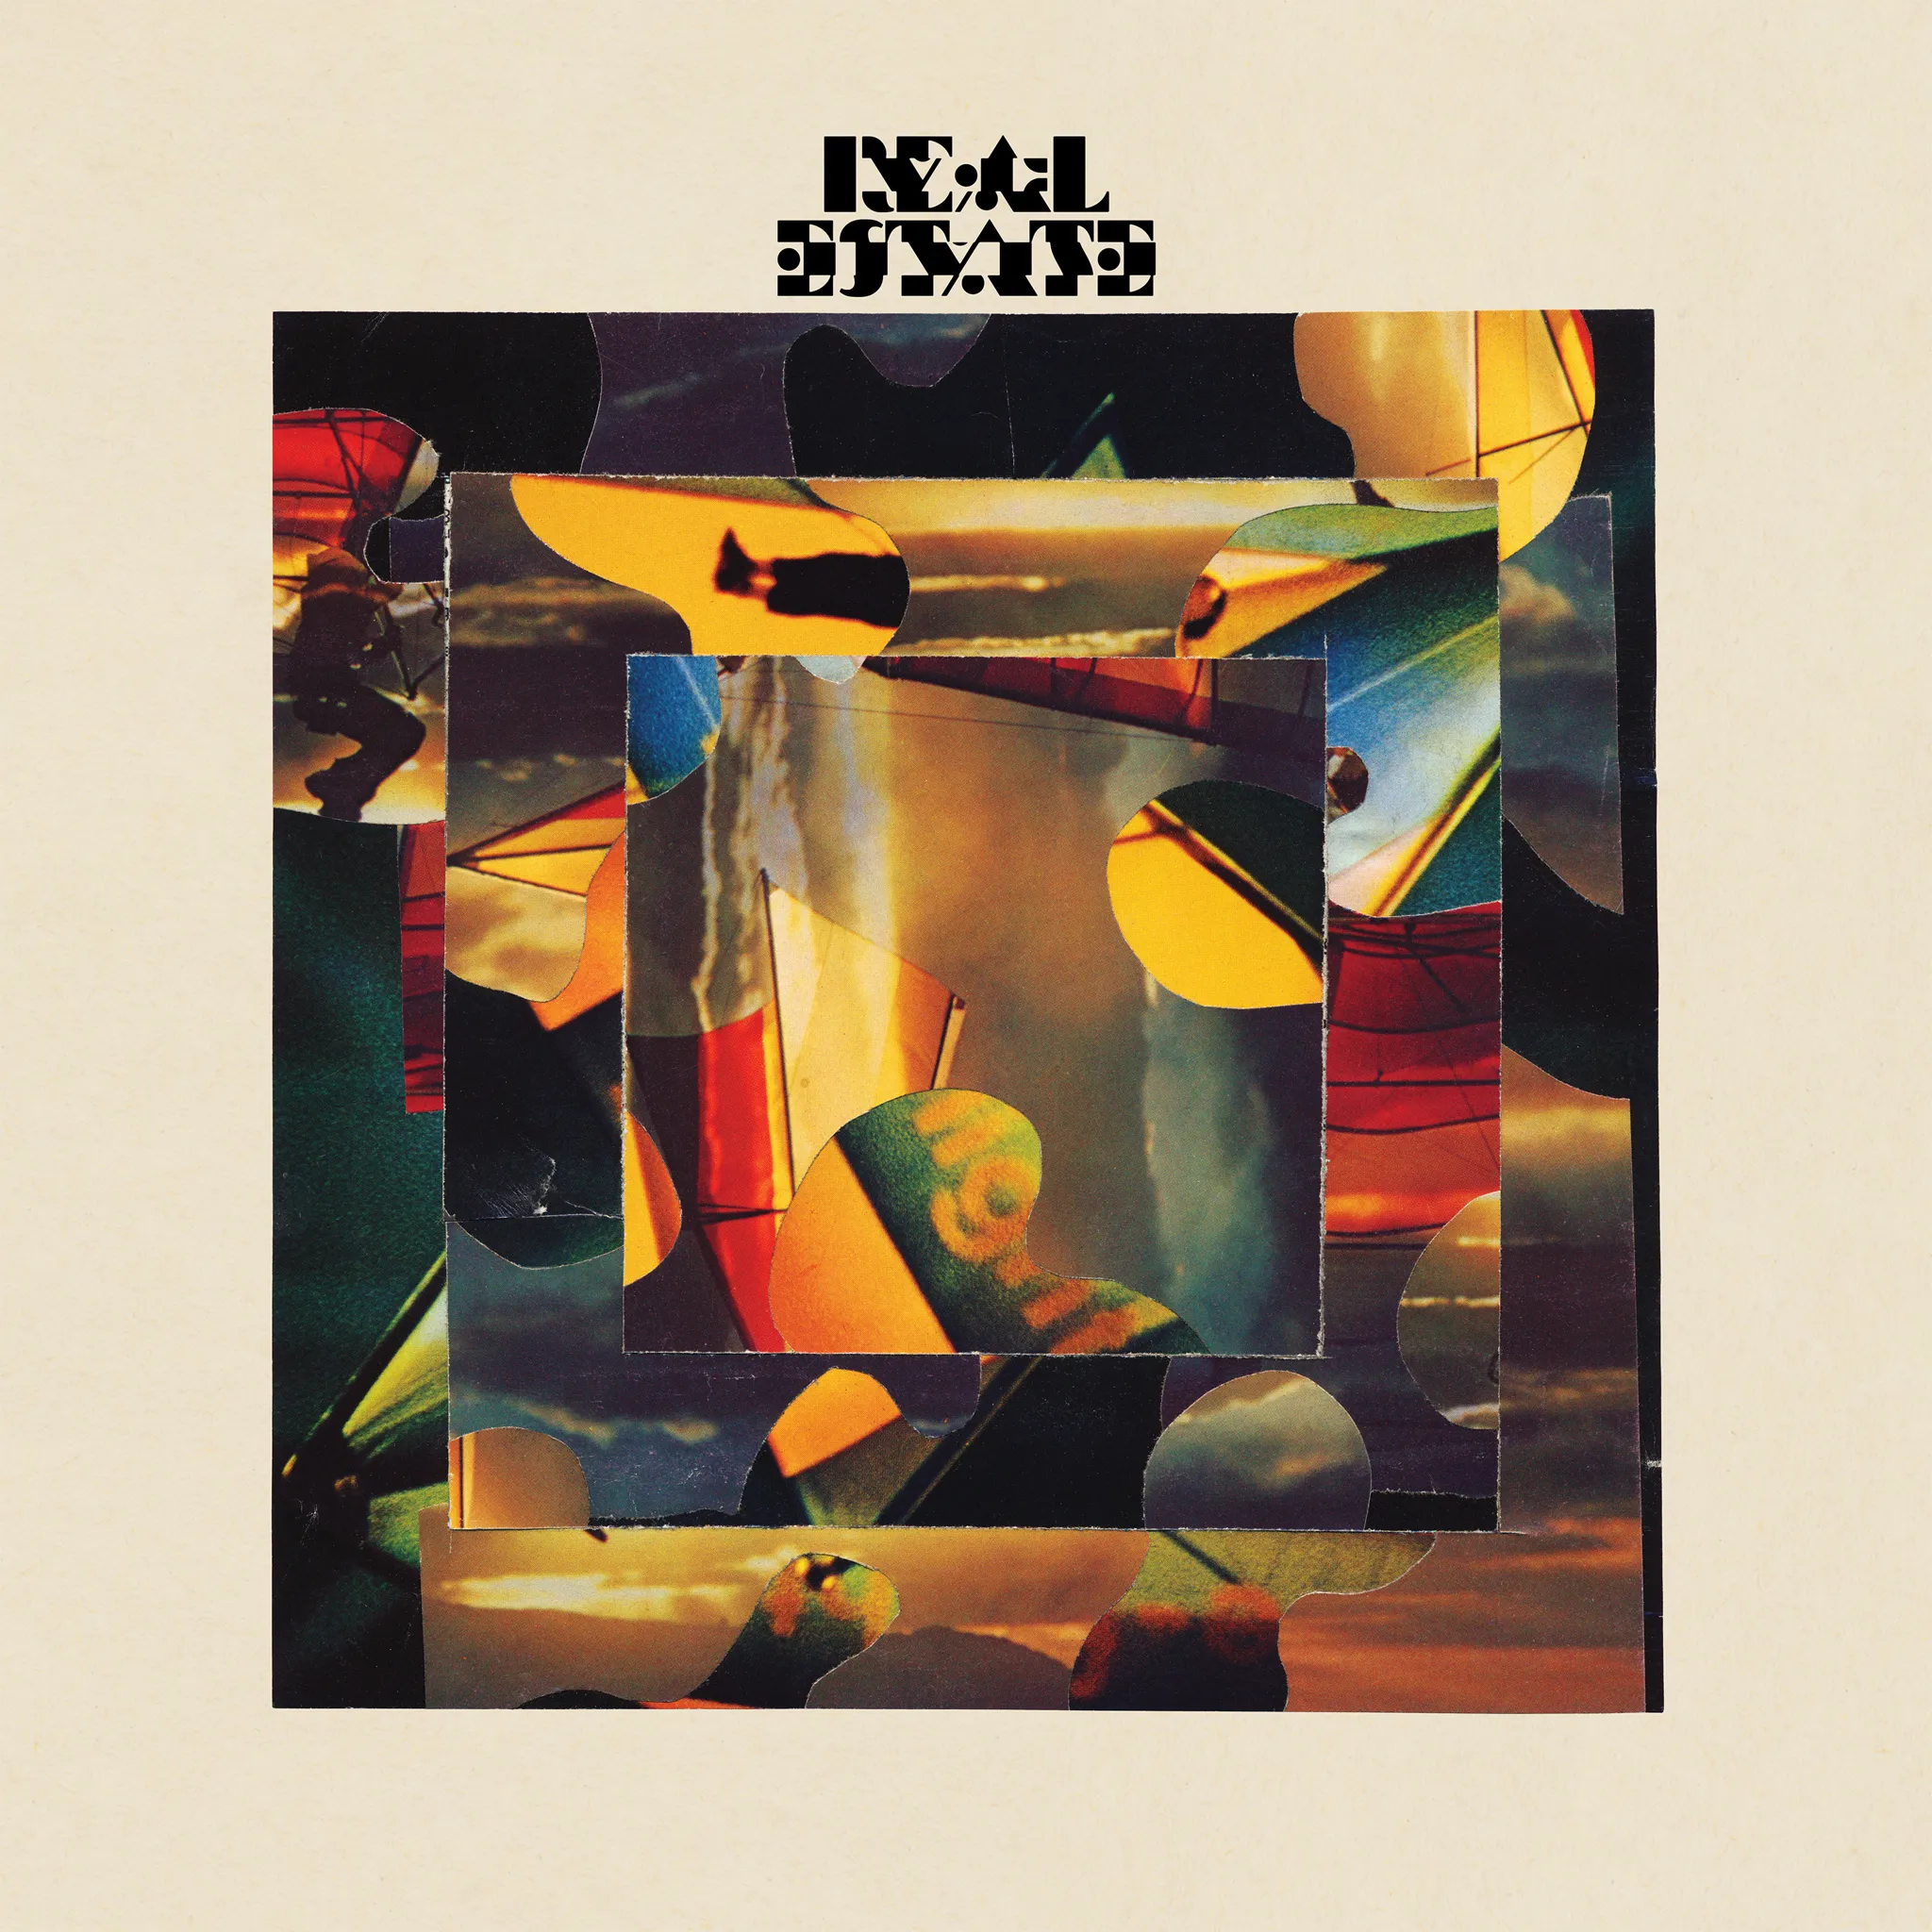 <strong>Real Estate - The Main Thing</strong> (Vinyl LP - black)